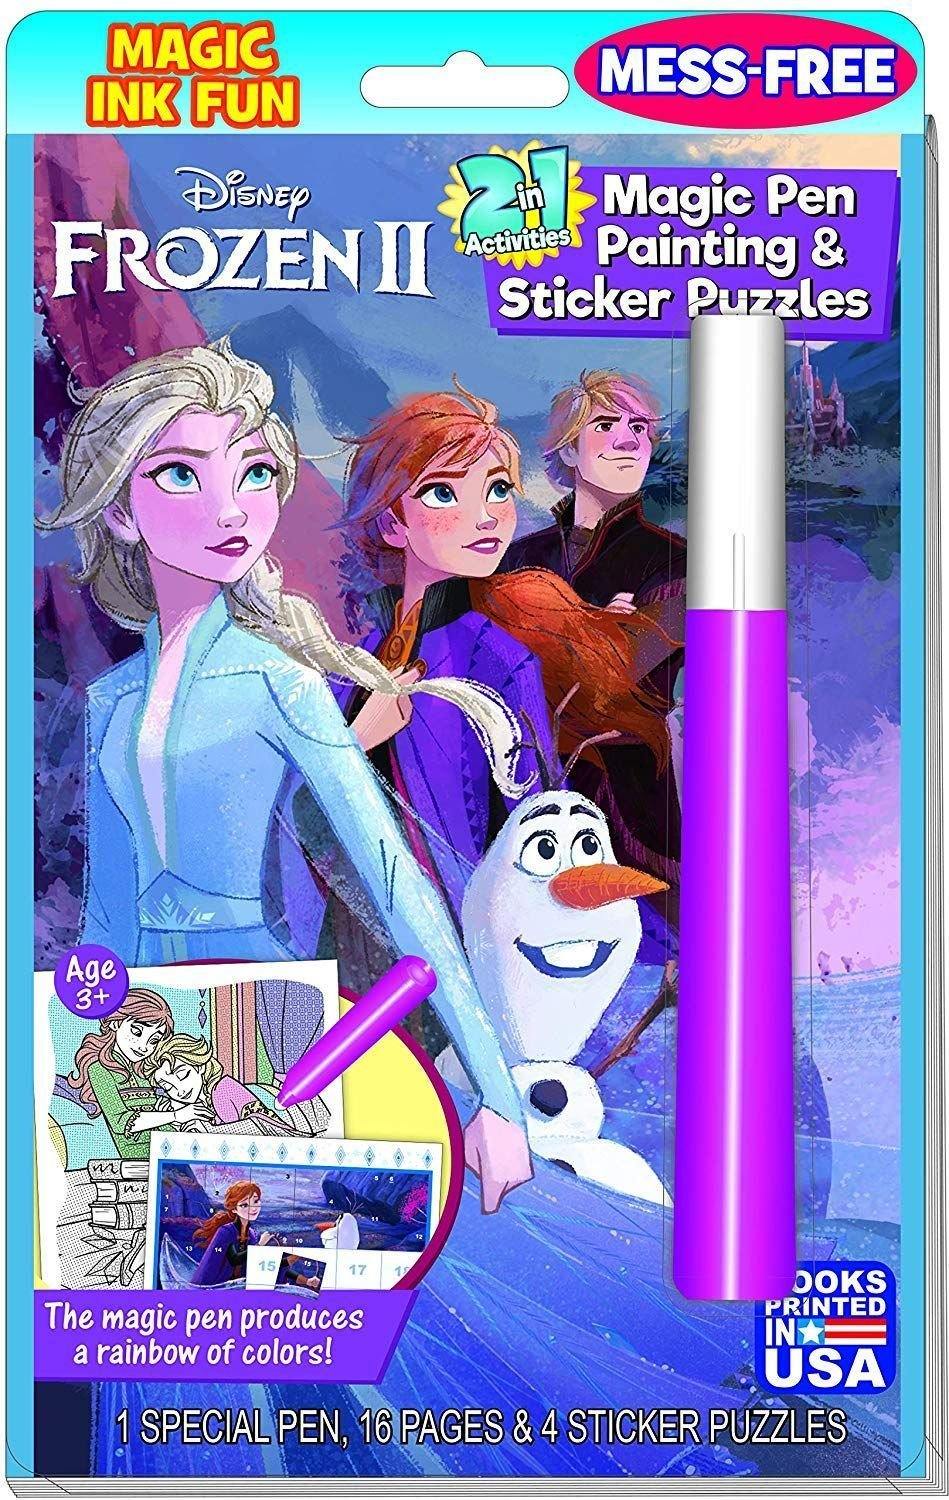 Disney Frozen Magic Pen Painting And Sticker Puzzles 2-In-1 Mess-Free Activities